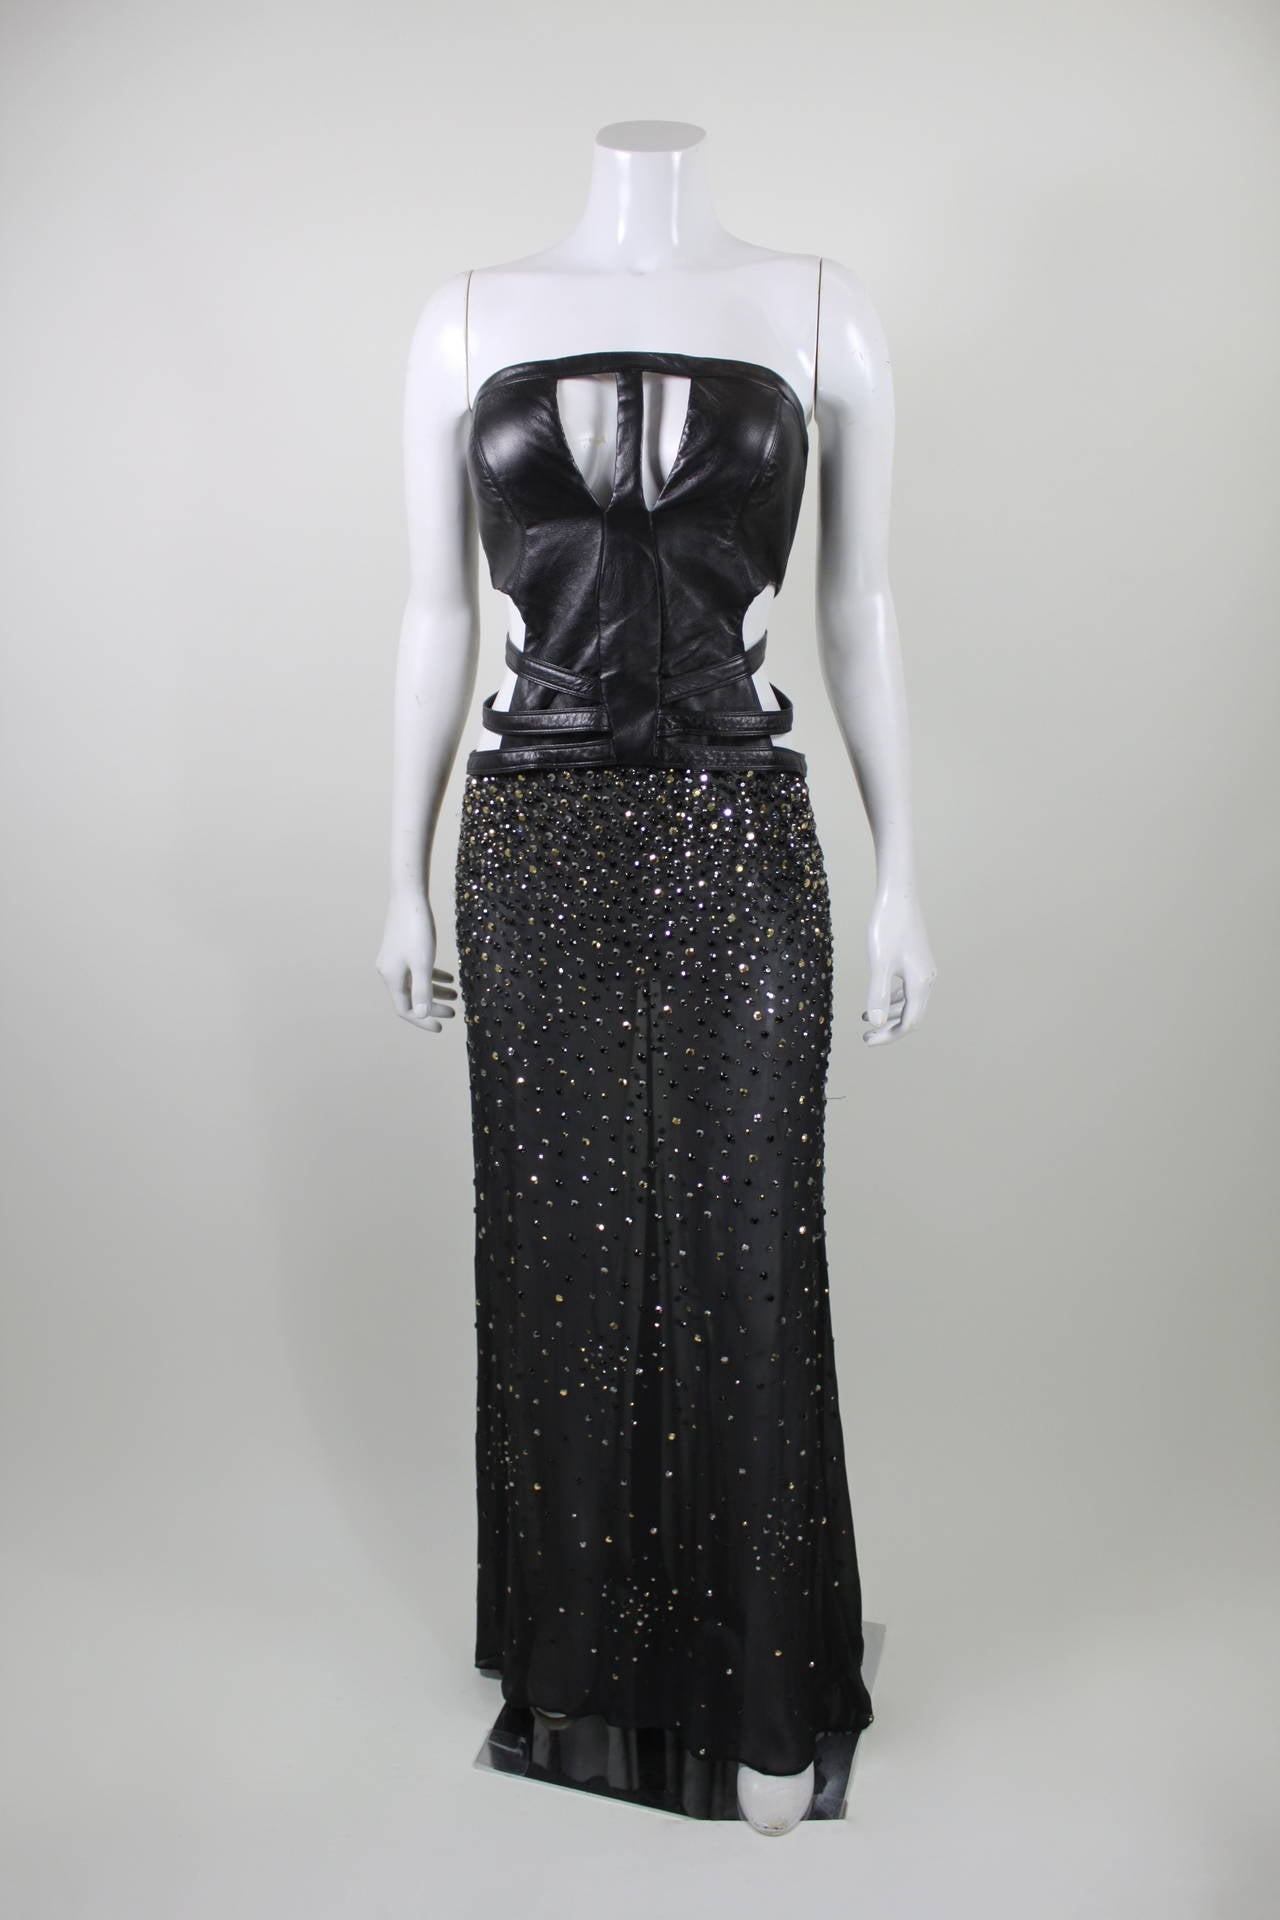 A jaw-dropping, ultra sexy gown from Versace. The bodice is done in supple, luxurious leather. Adjustable straps at the waist ensure a perfect, body-hugging fit. A sheer black chiffon skirt is embellished with prong-set rhinestones, in dazzling